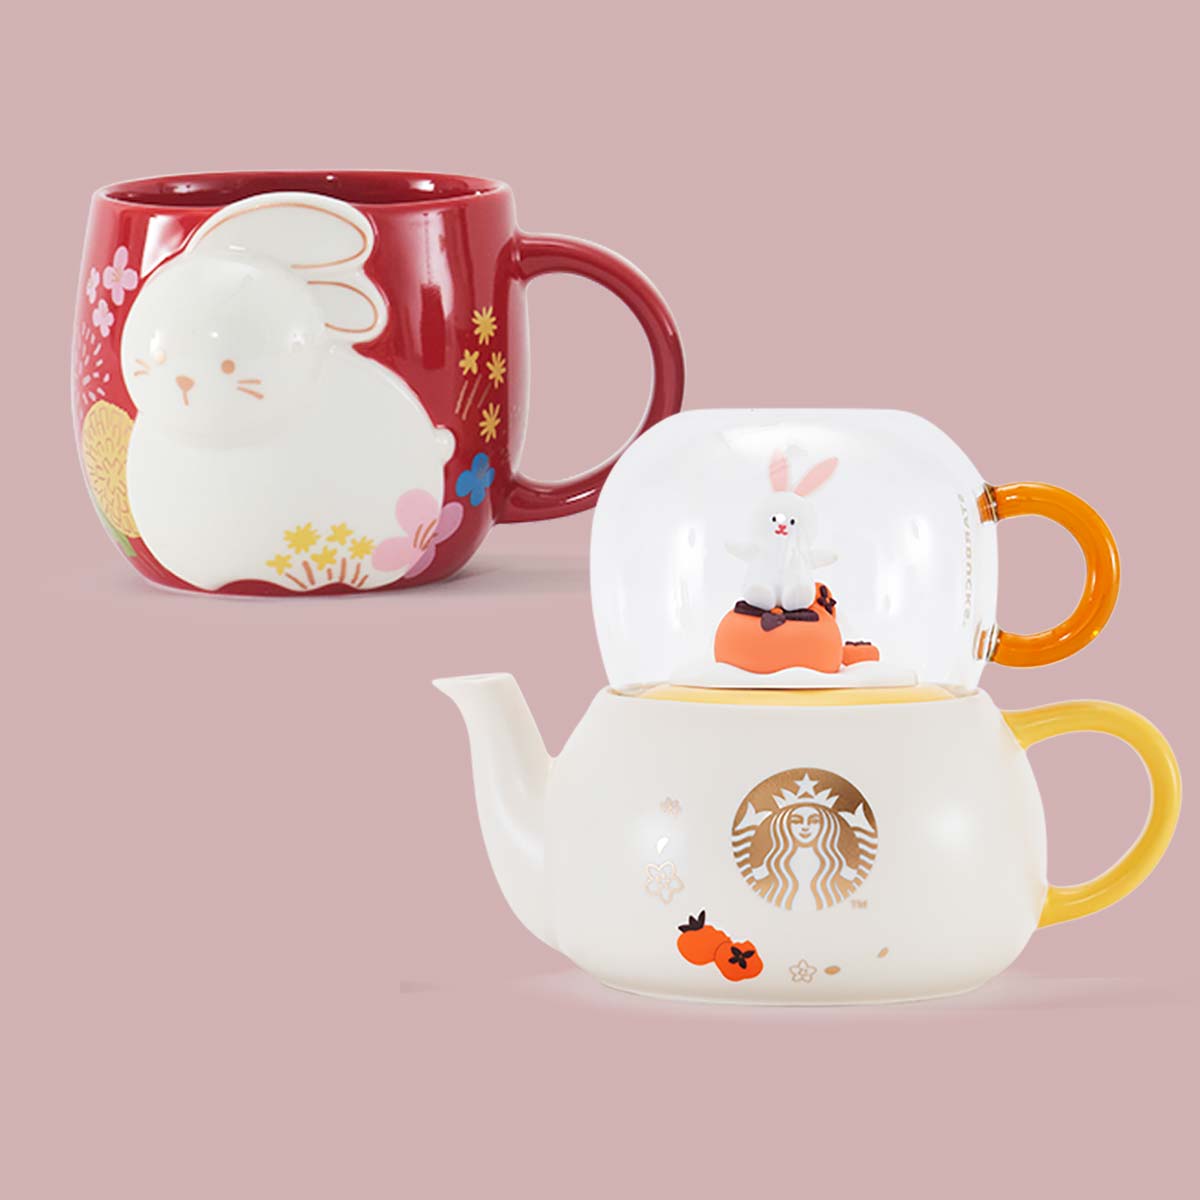 Starbucks Year of the Rabbit cups available in China only.